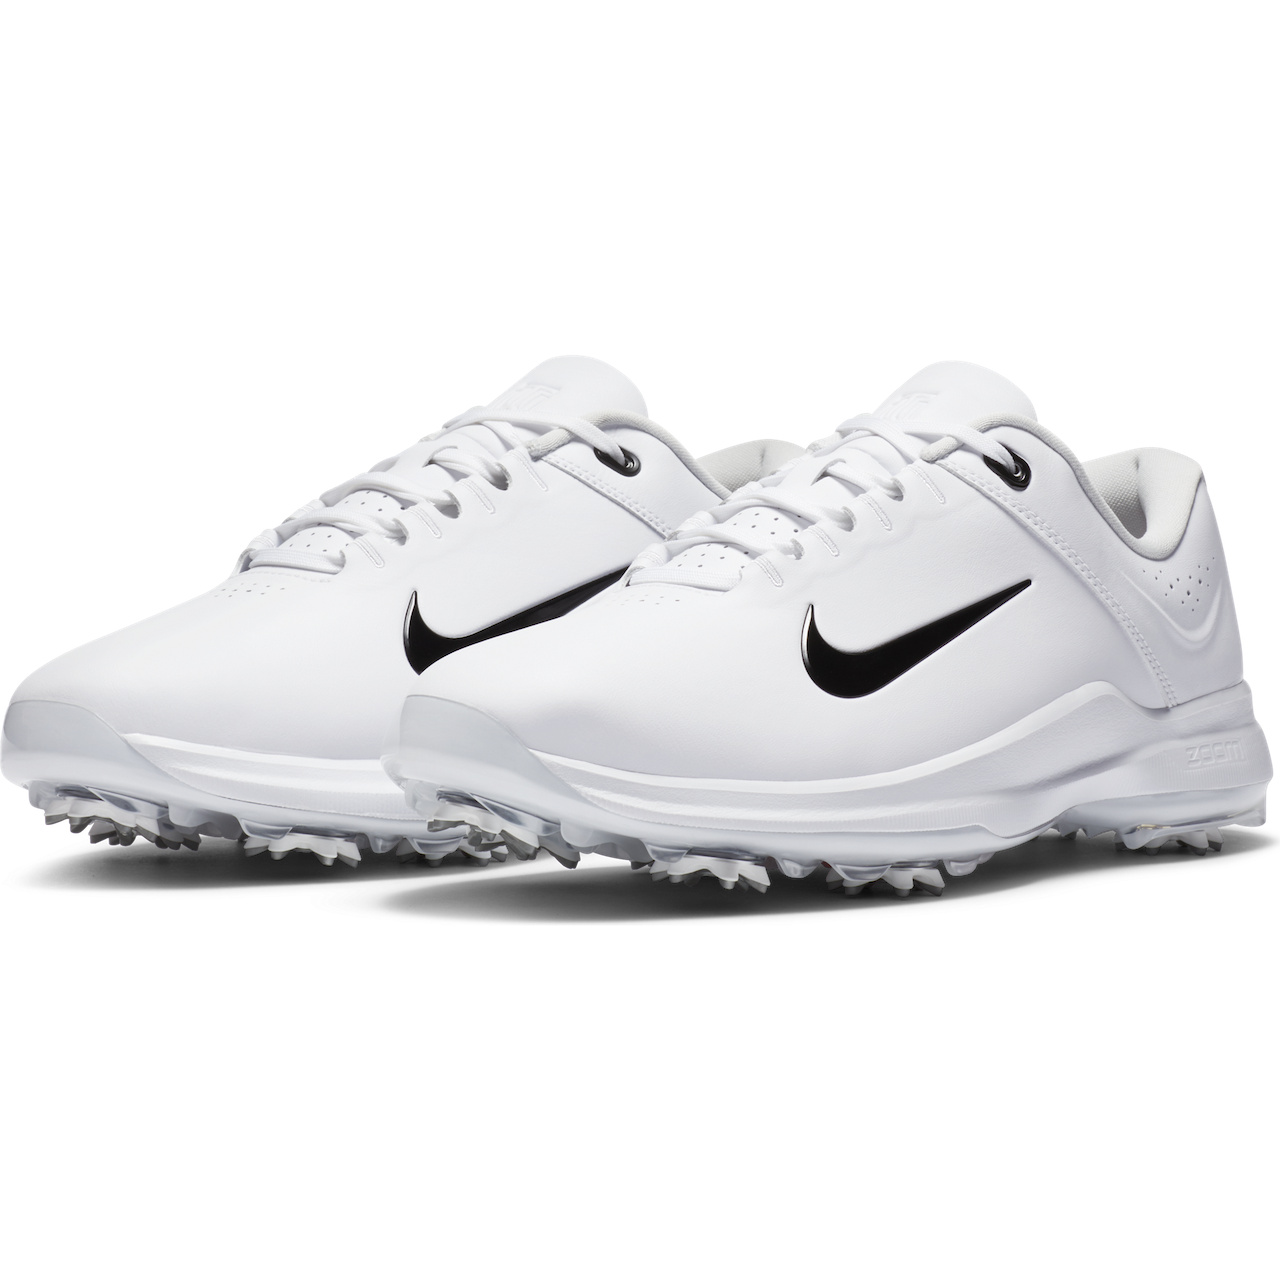 Tiger Woods’ 2020 Nike Golf Shoes – Classic Look with Modern Performance.